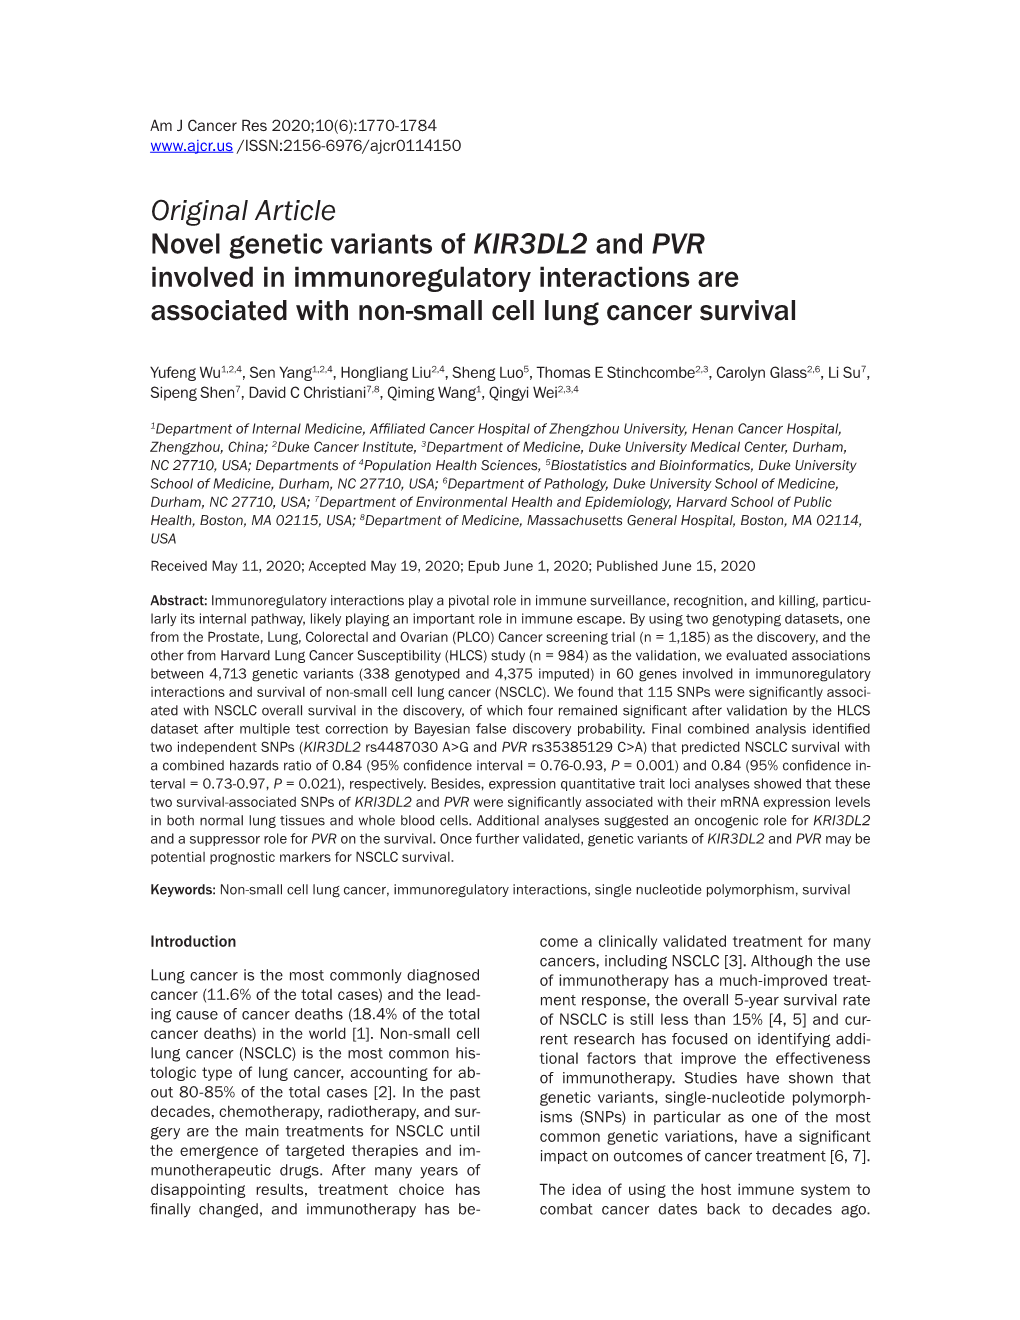 Original Article Novel Genetic Variants of KIR3DL2 and PVR Involved in Immunoregulatory Interactions Are Associated with Non-Small Cell Lung Cancer Survival